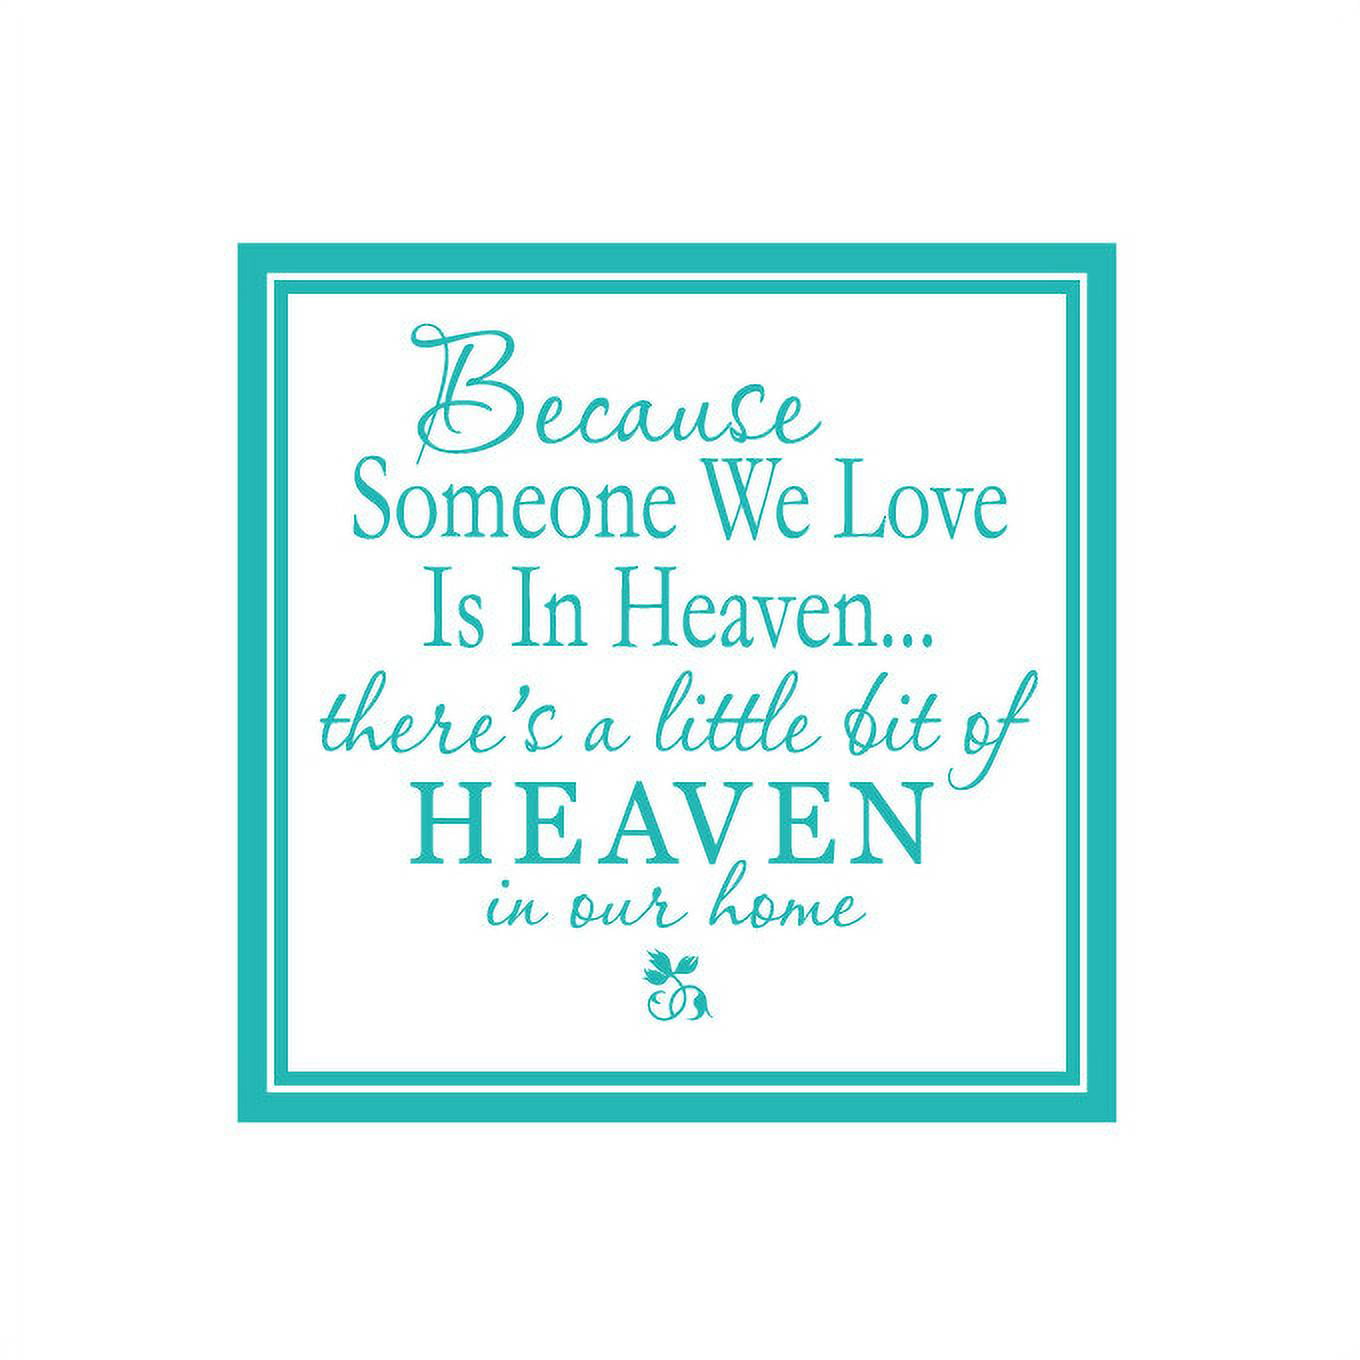 VINYL DECAL FOR GLASS BLOCK BECAUSE SOMEONE WE LOVE IS IN HEAVEN......